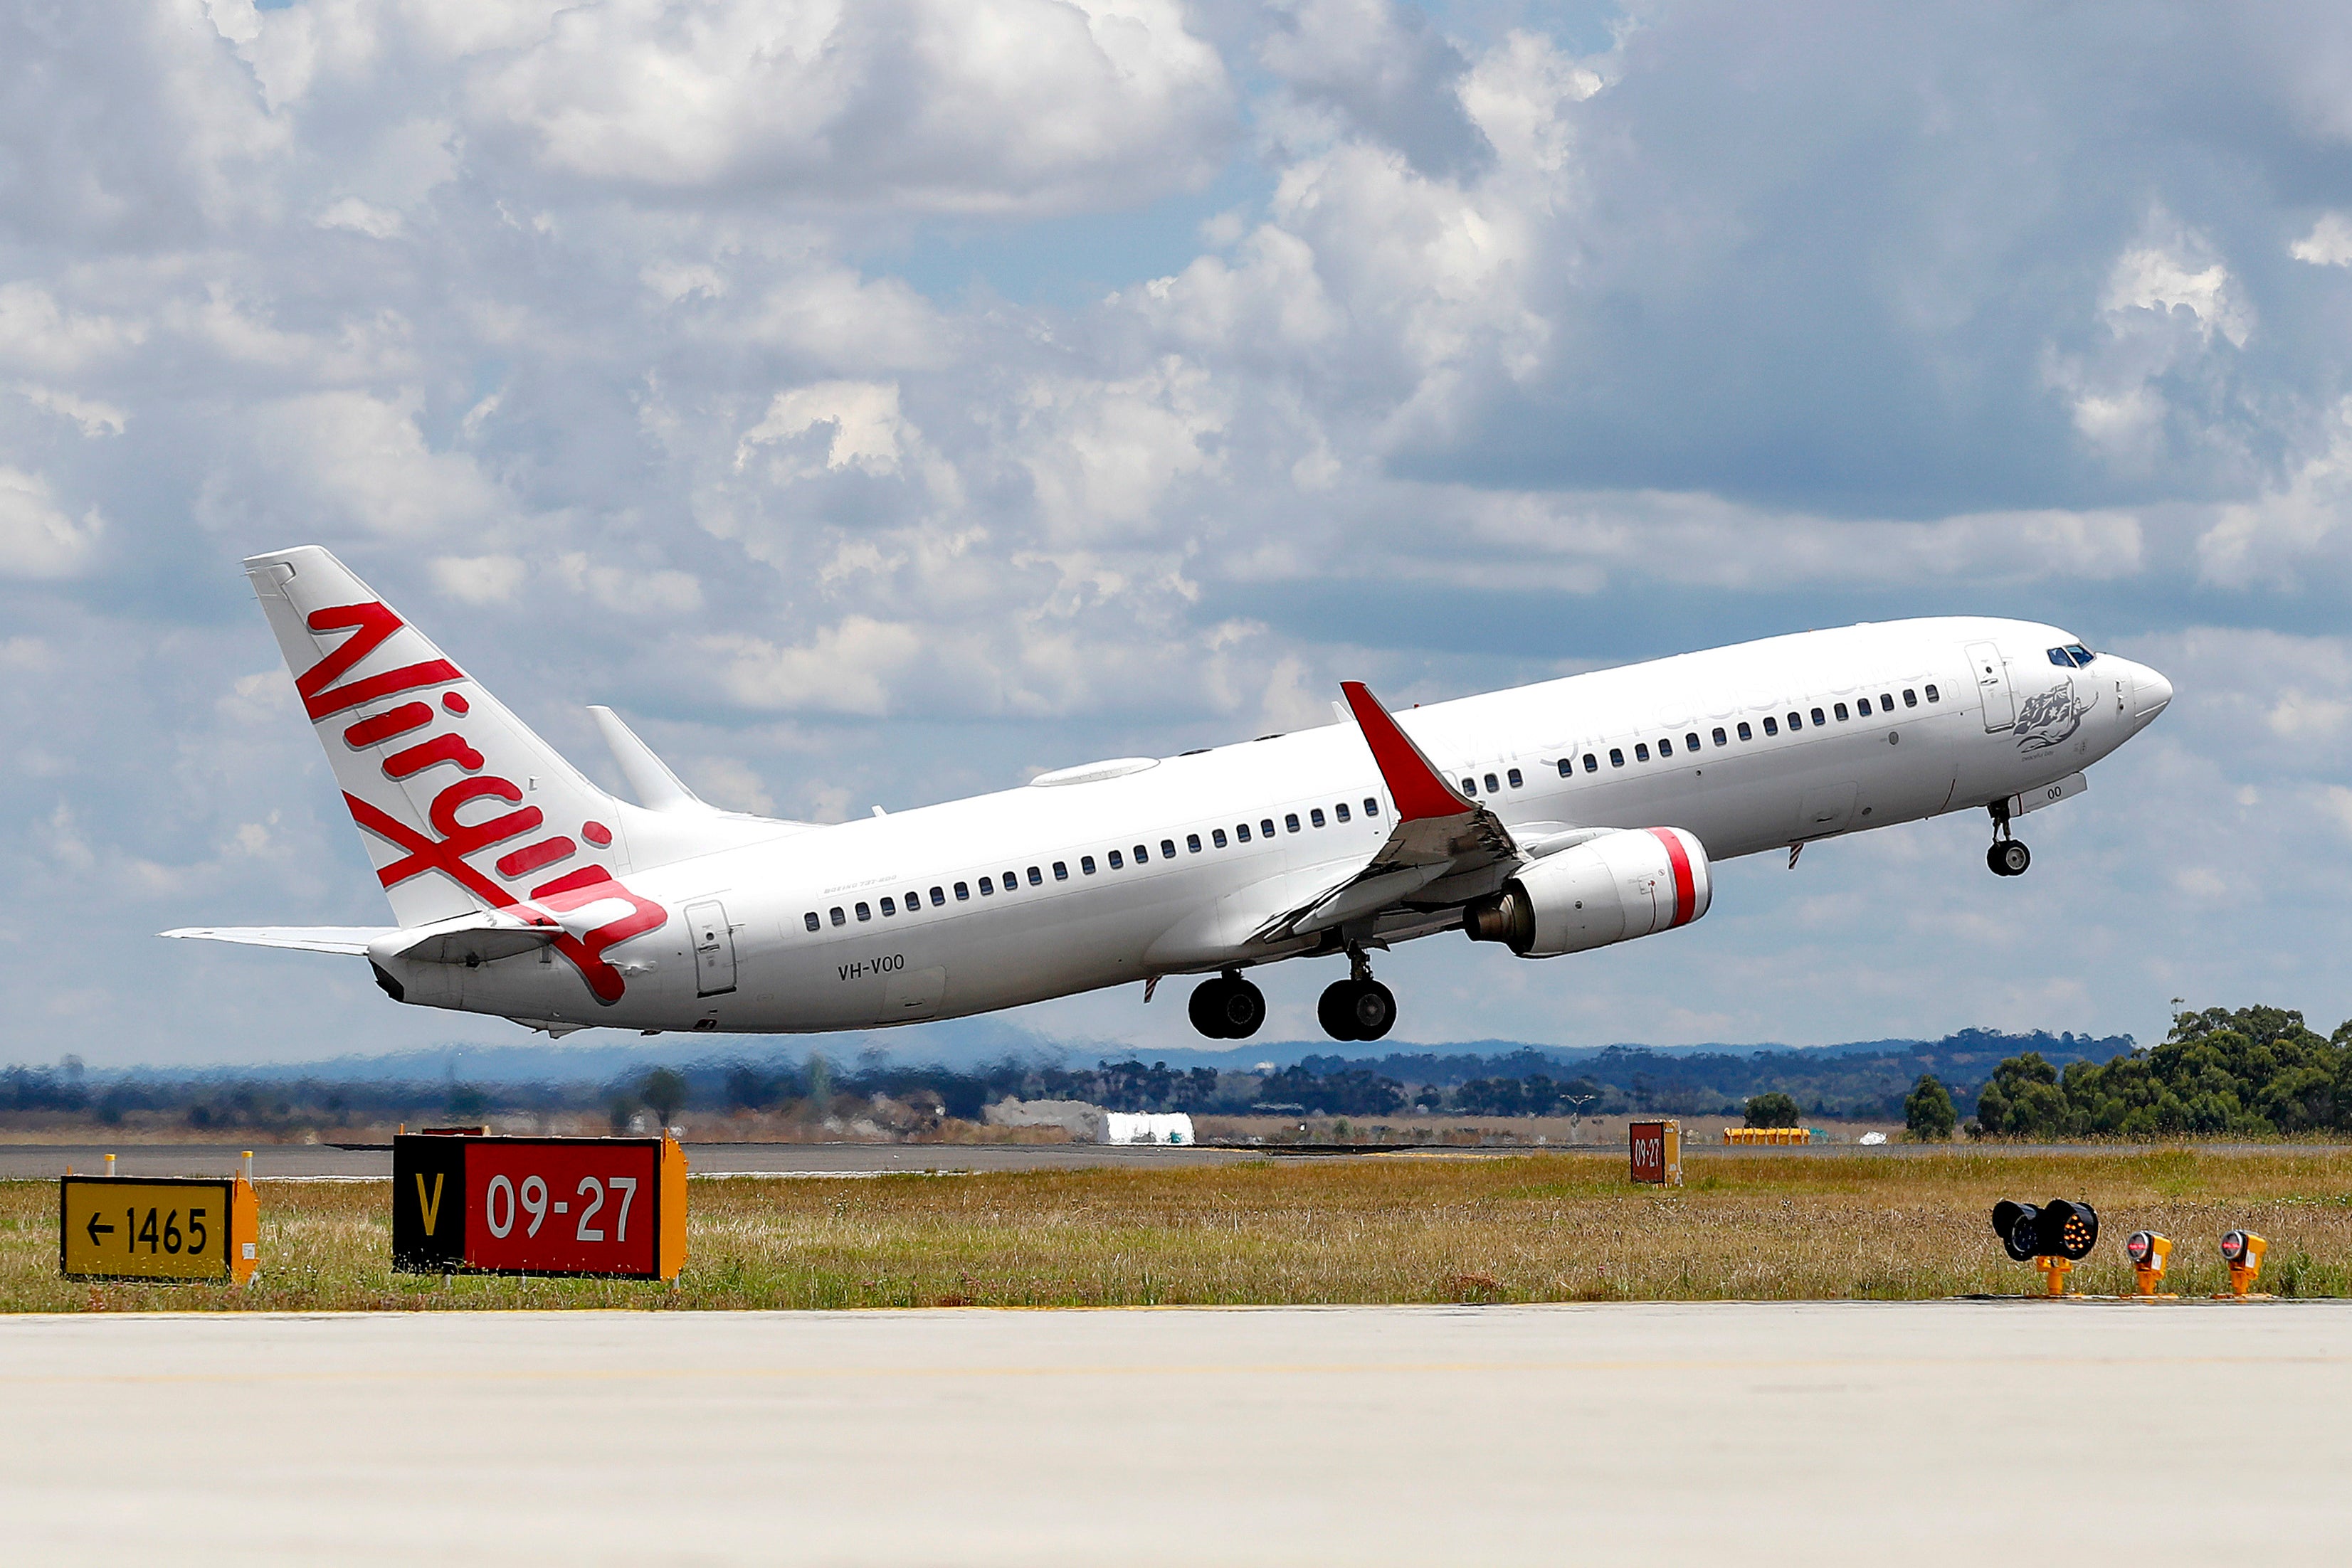 A Virgin Airlines plane takes from Melbourne Airport in Melbourne, Australia, on Jan. 31, 2022